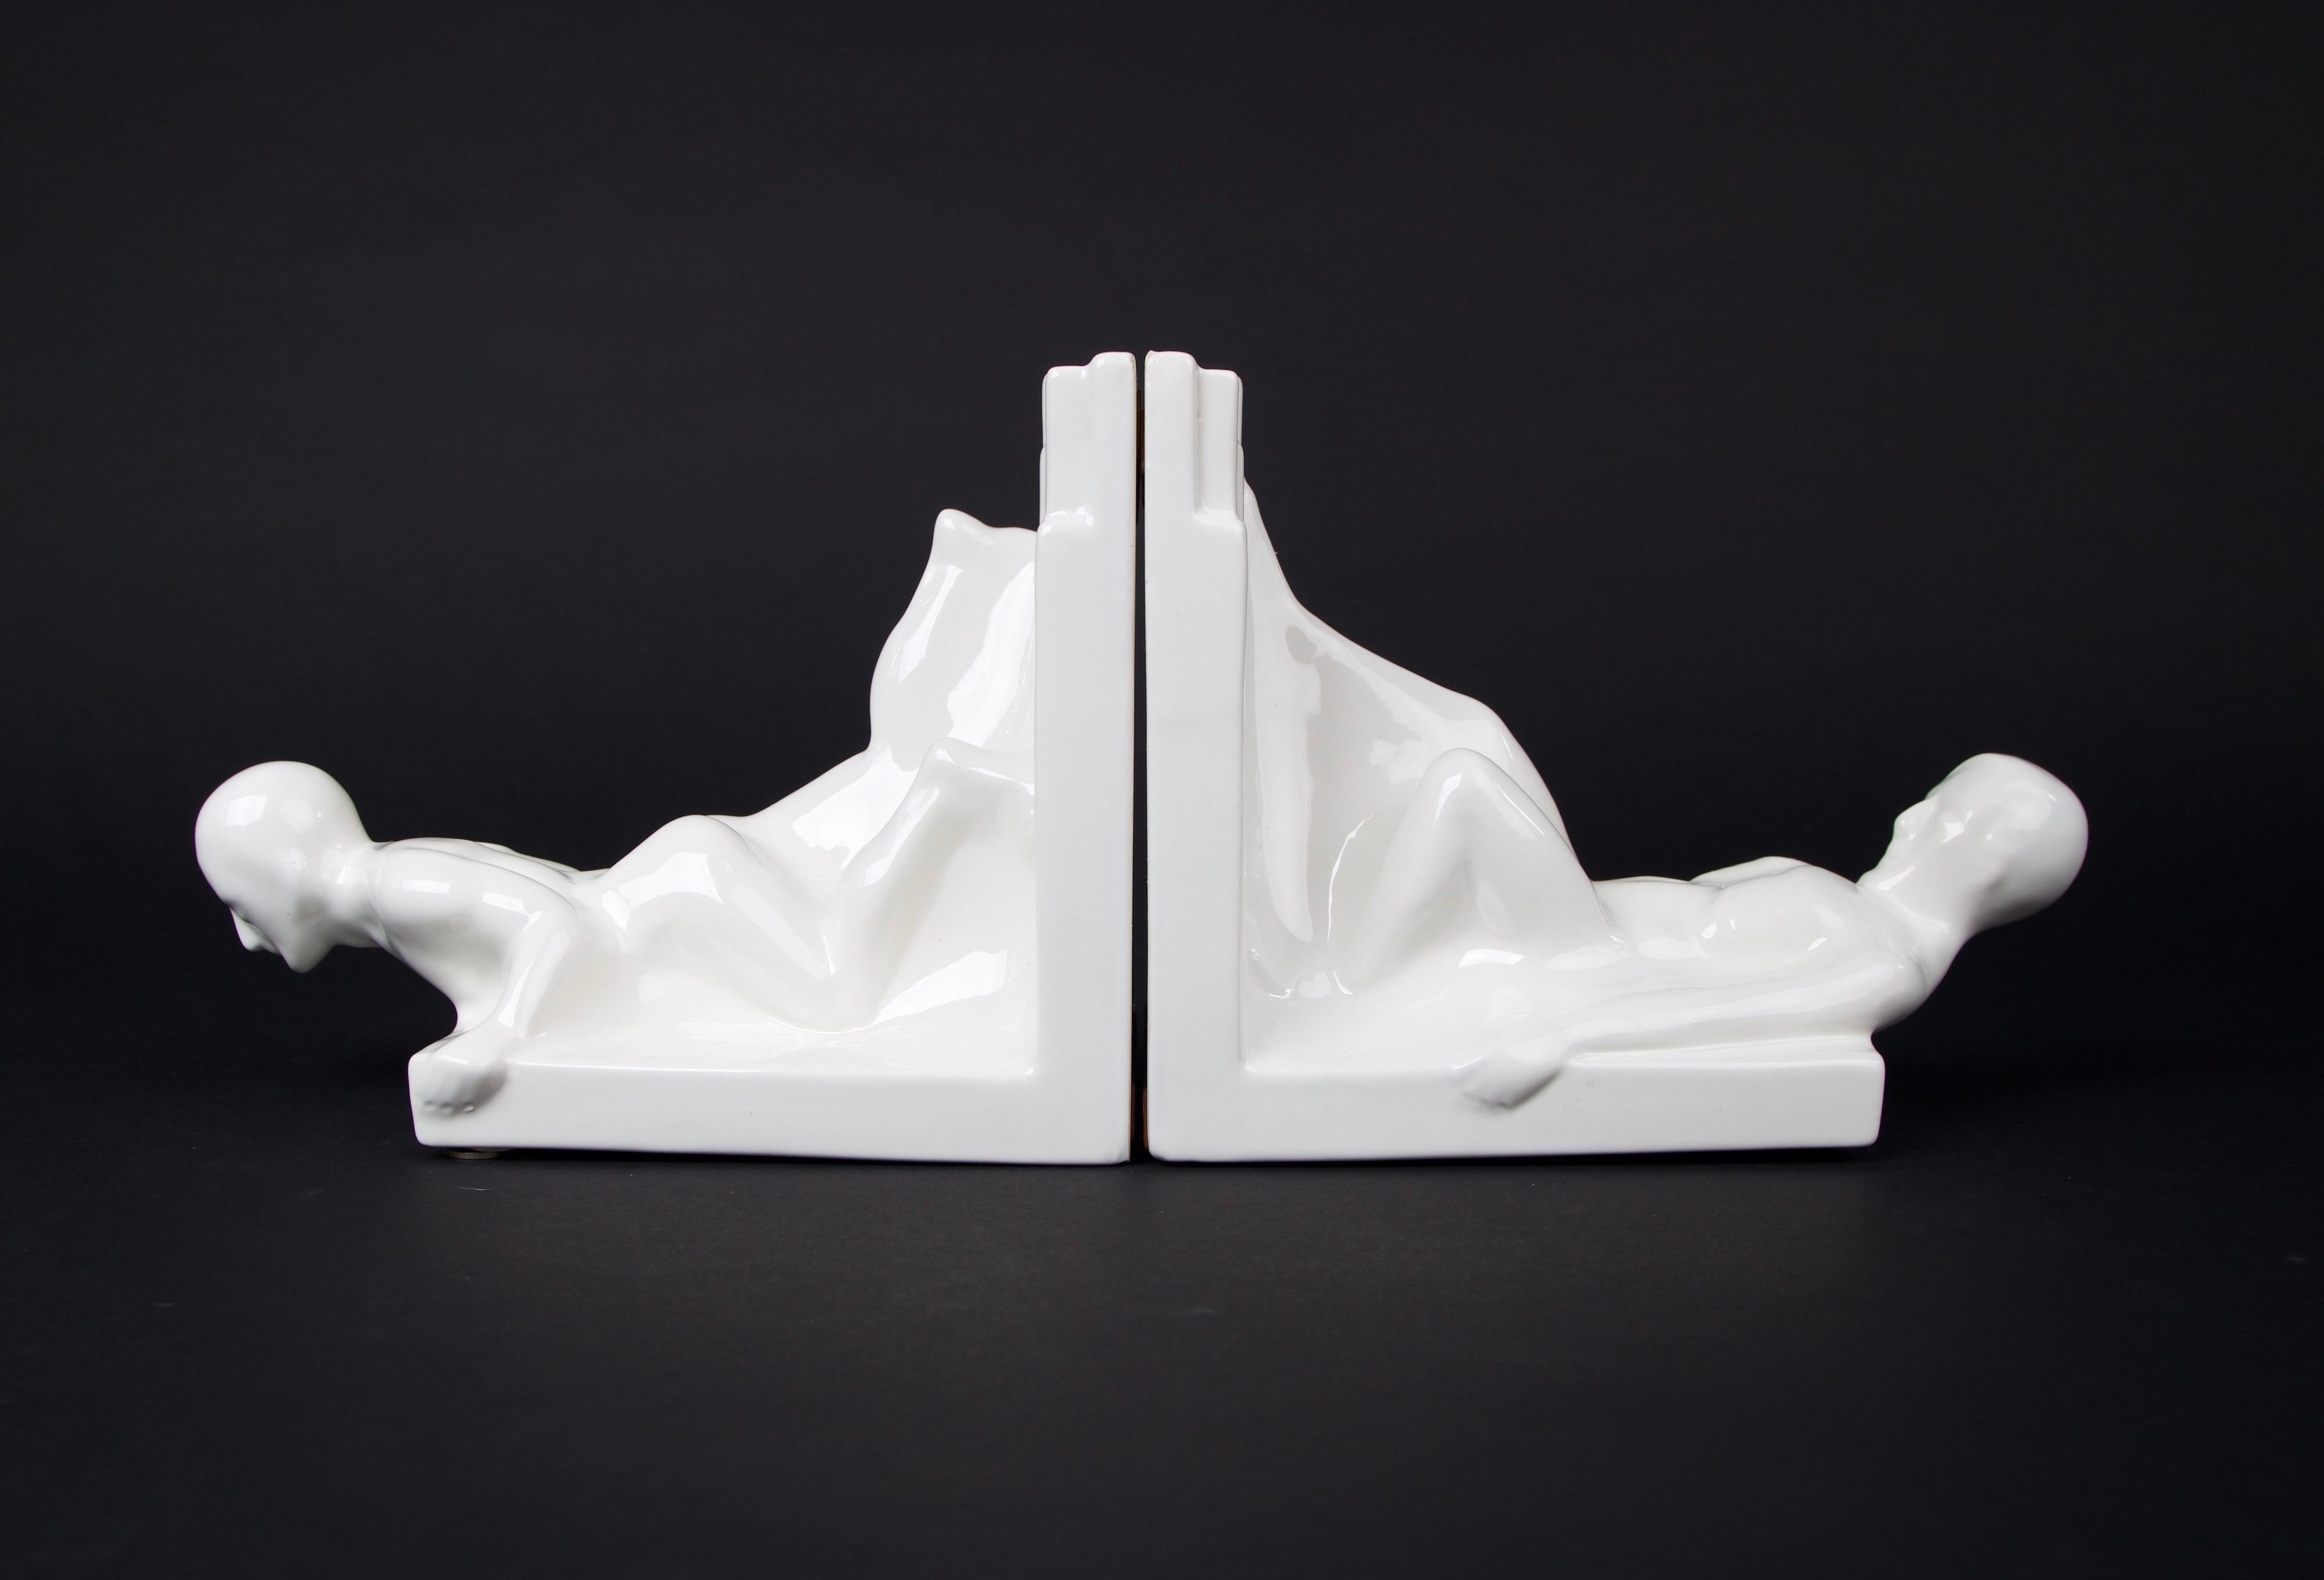 Art Deco white ceramic male bookends
Made by Plateelbakkerij Schoonhoven Holland during the 1920s.